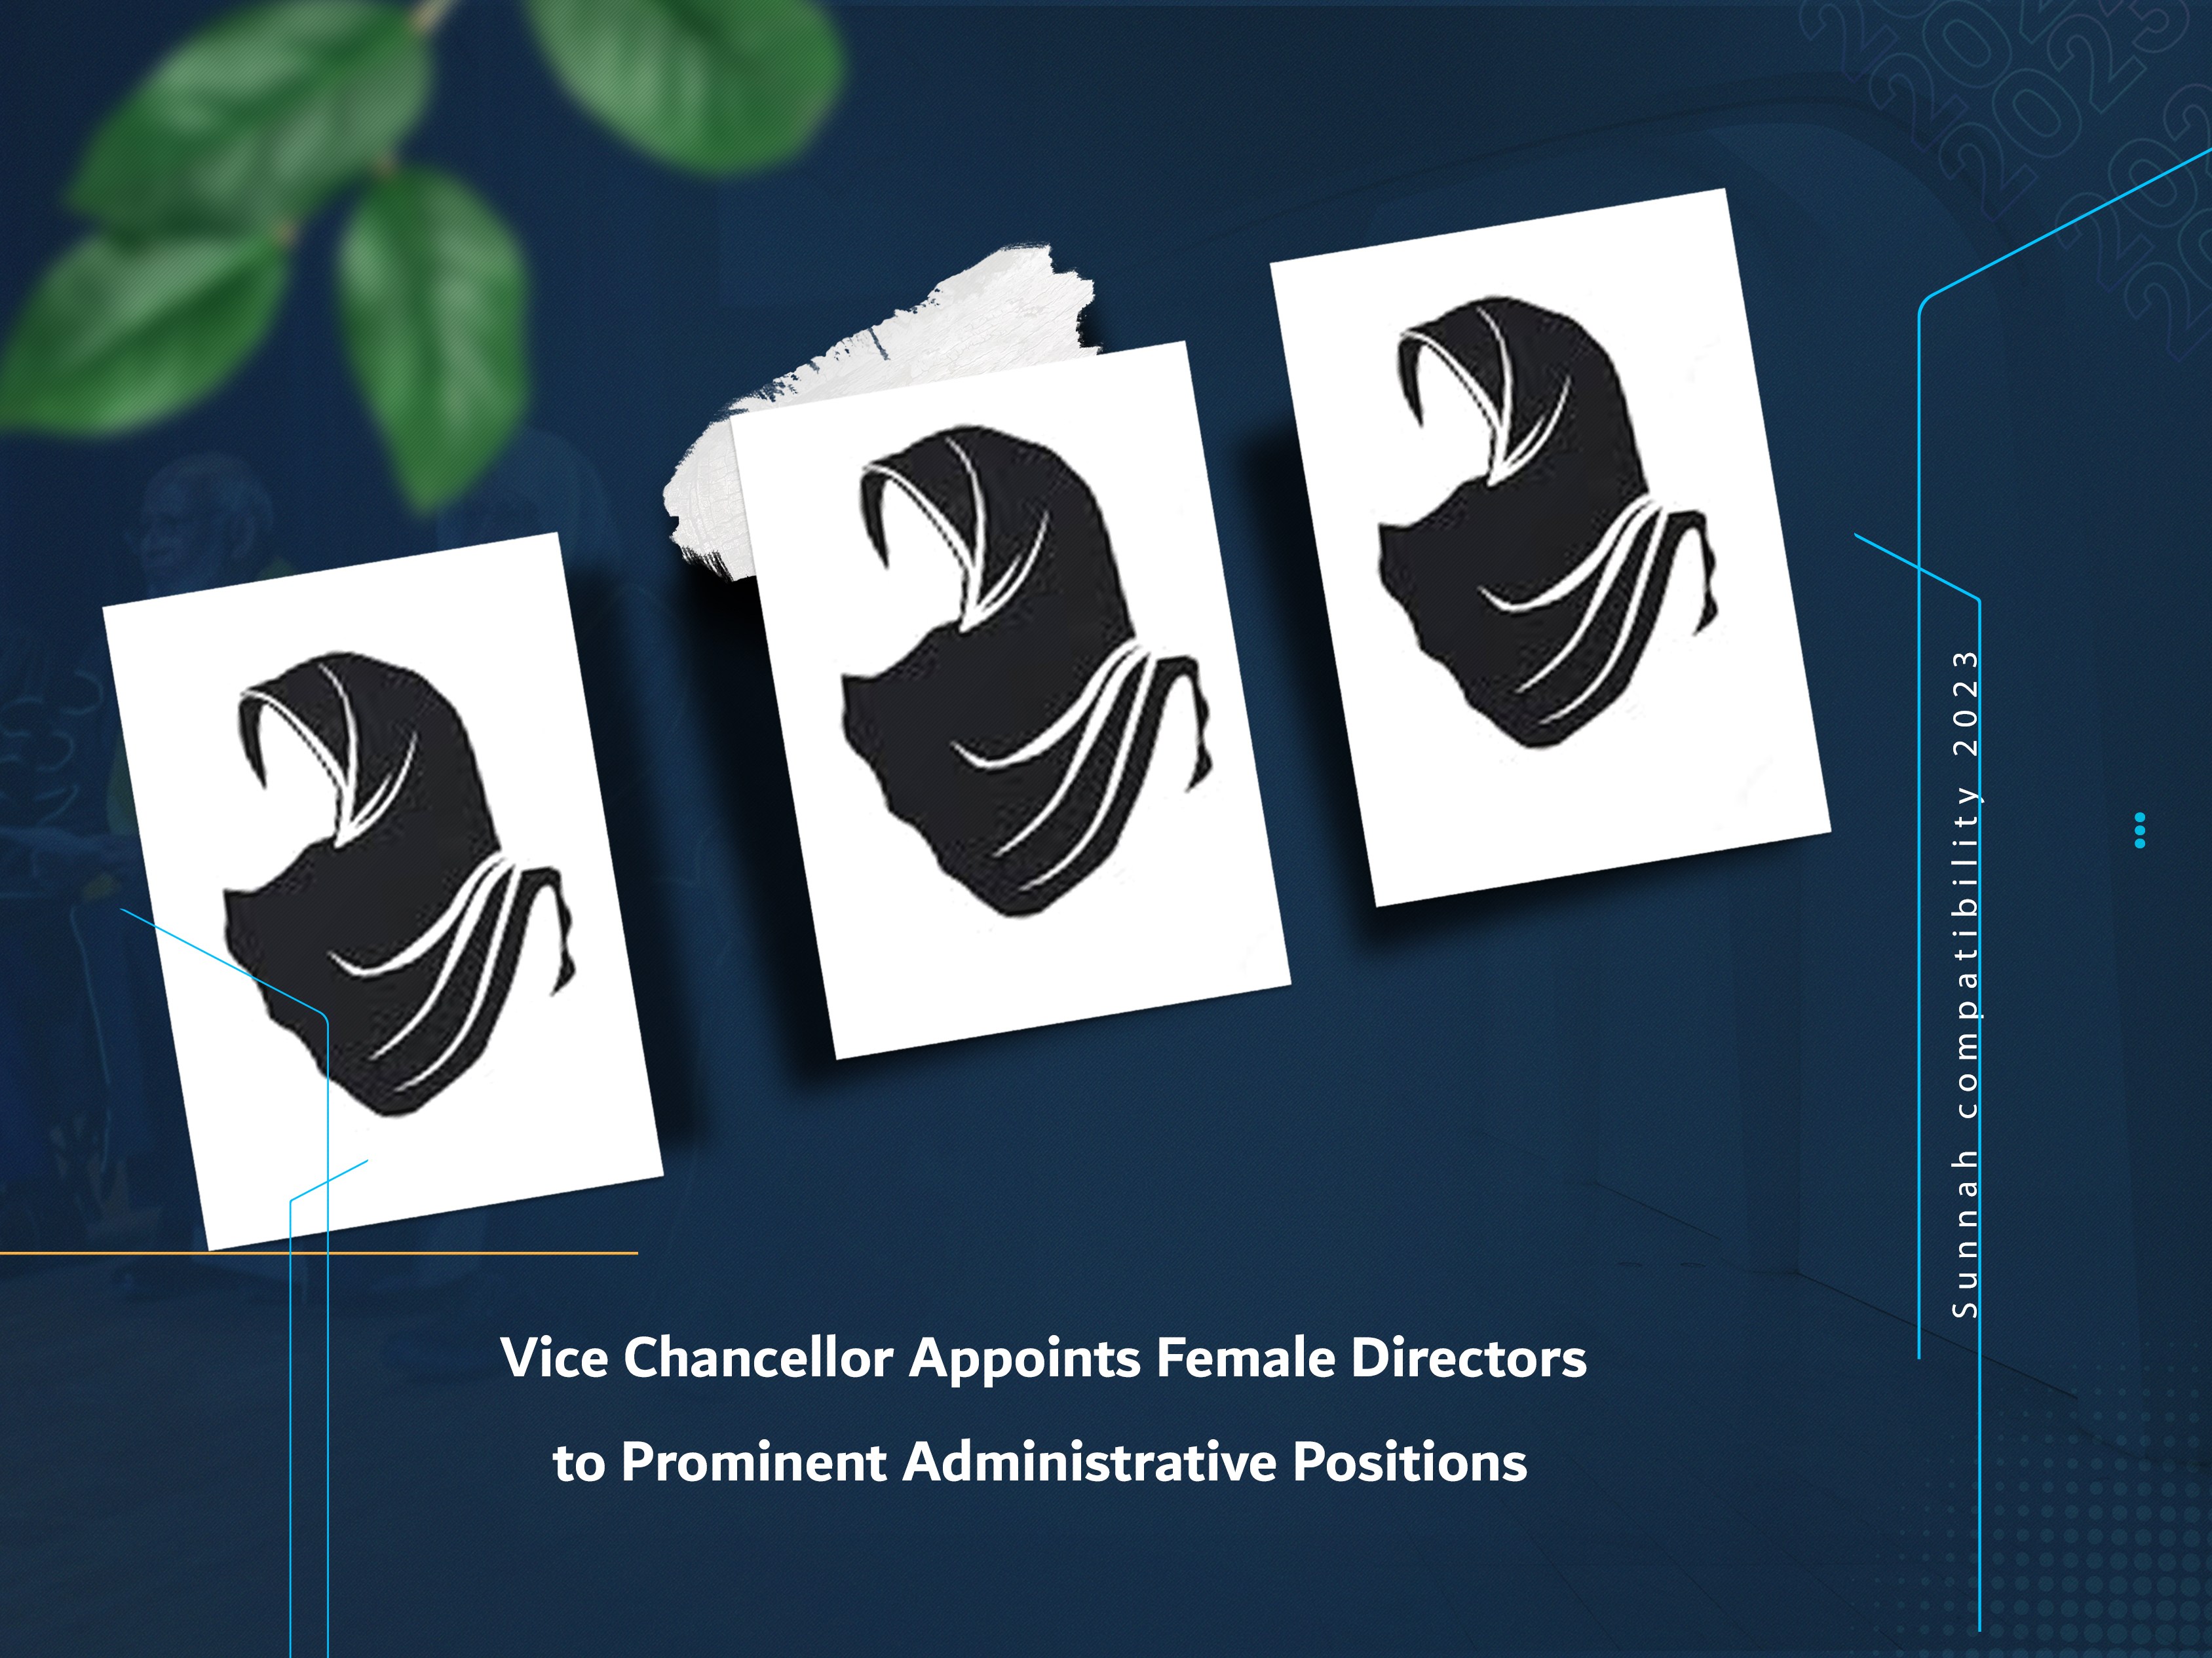 Vice Chancellor Appoints Female Directors to Prominent Administrative Positions